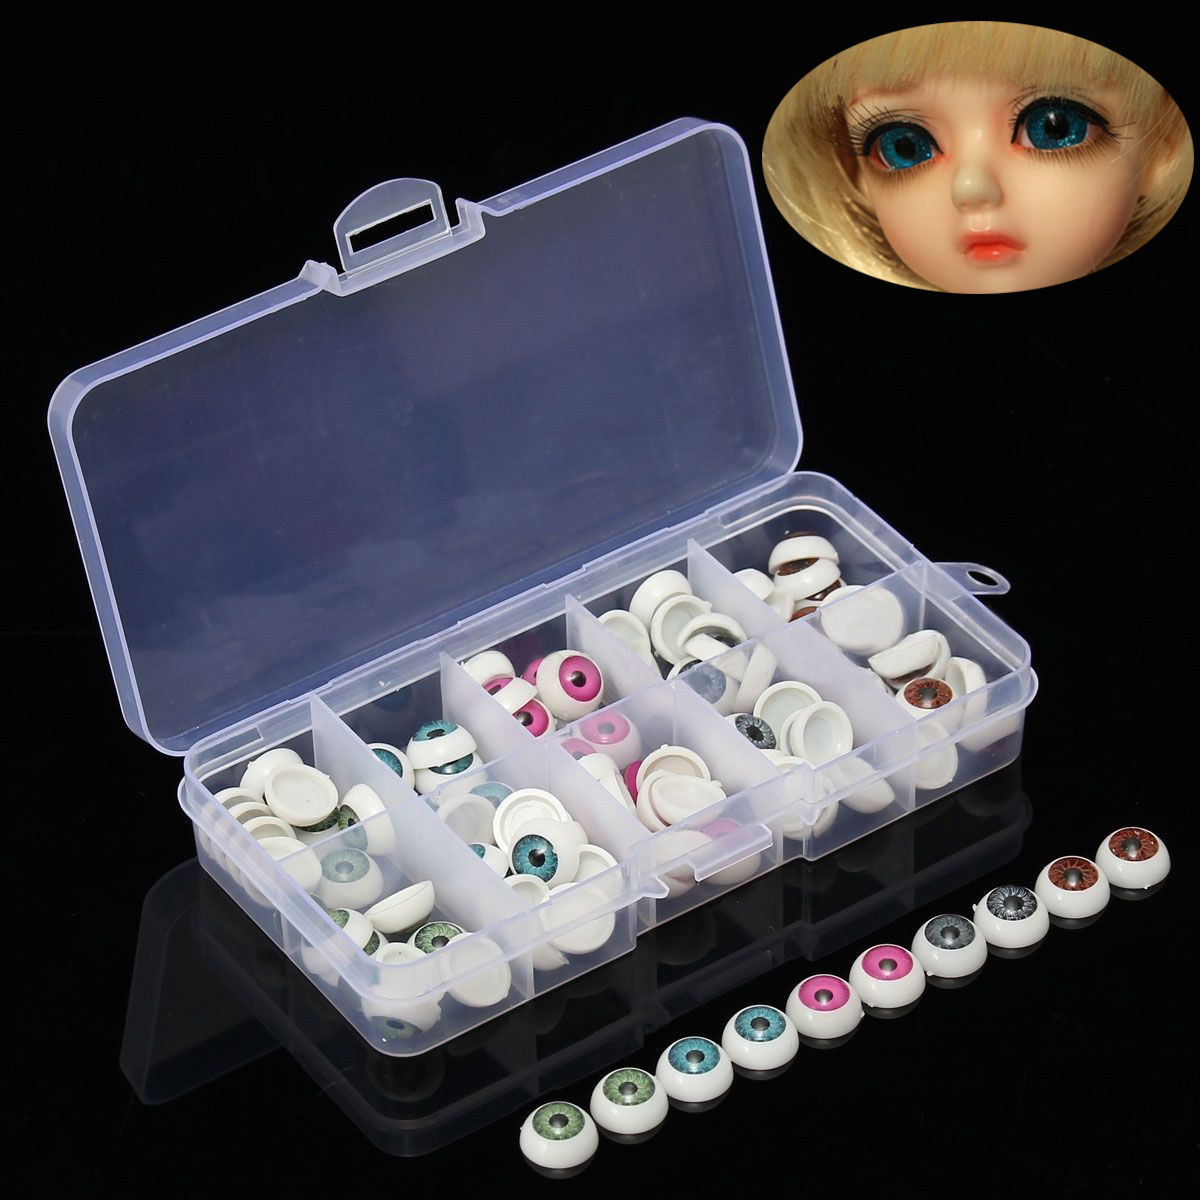 100pcs 5 Colors Plastic Safety Eyes For Teddy Bear Doll Animal Toy Crafts 12mm